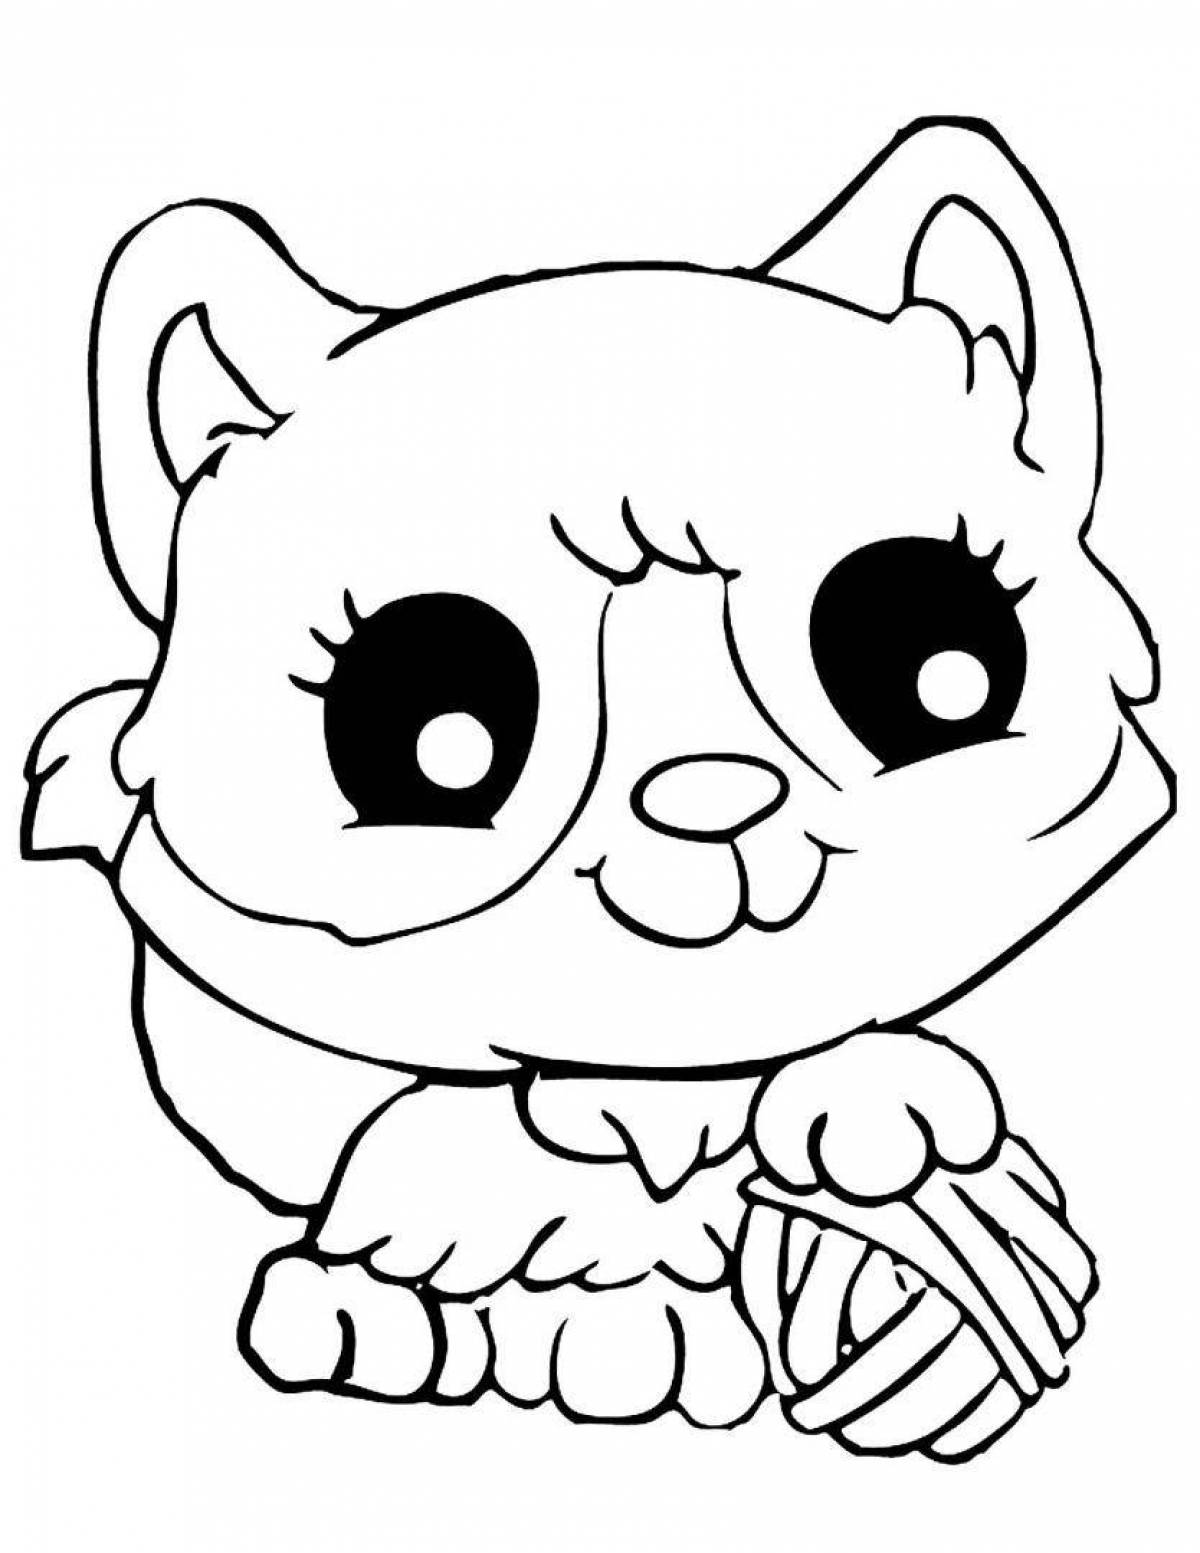 Cute cute cats coloring book for girls